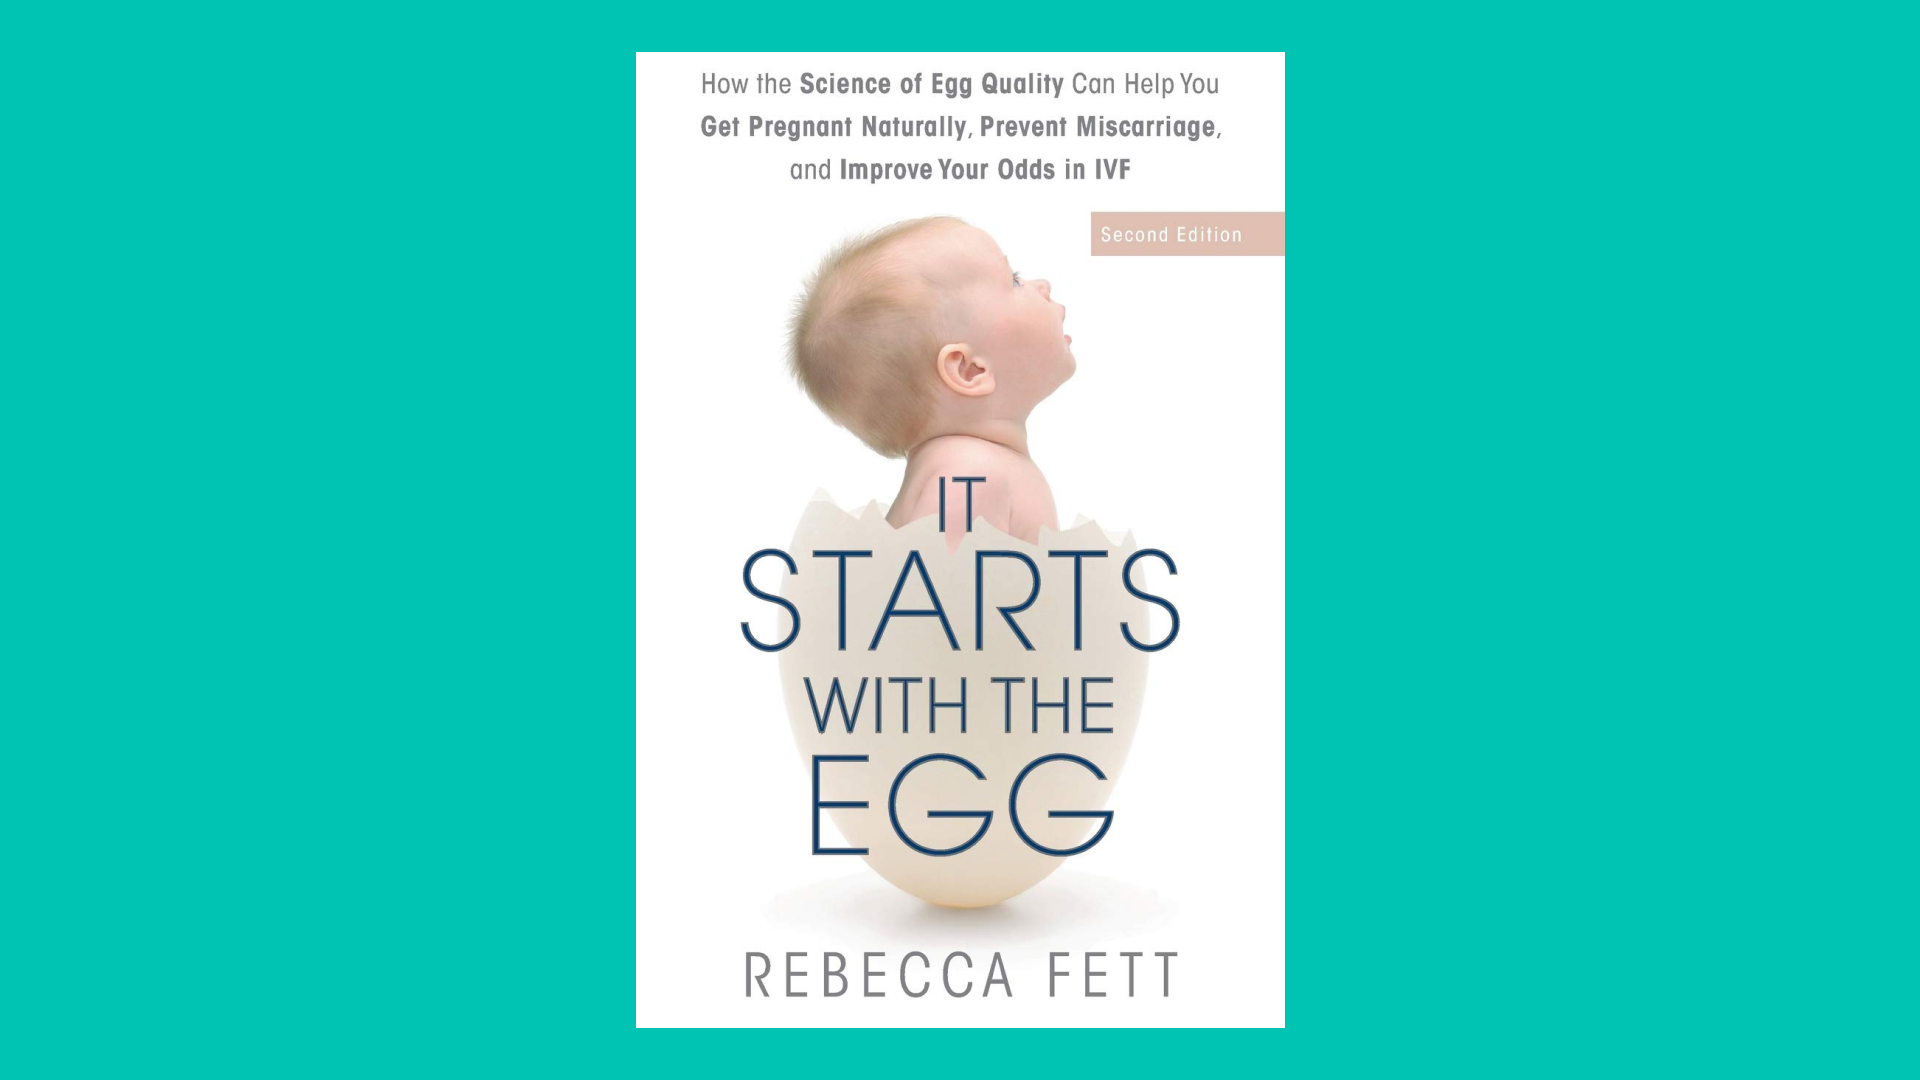 “It Starts with the Egg: How the Science of Egg Quality Can Help You Get Pregnant Naturally, Prevent Miscarriage, and Improve Your Odds in IVF” by Rebecca Fett 